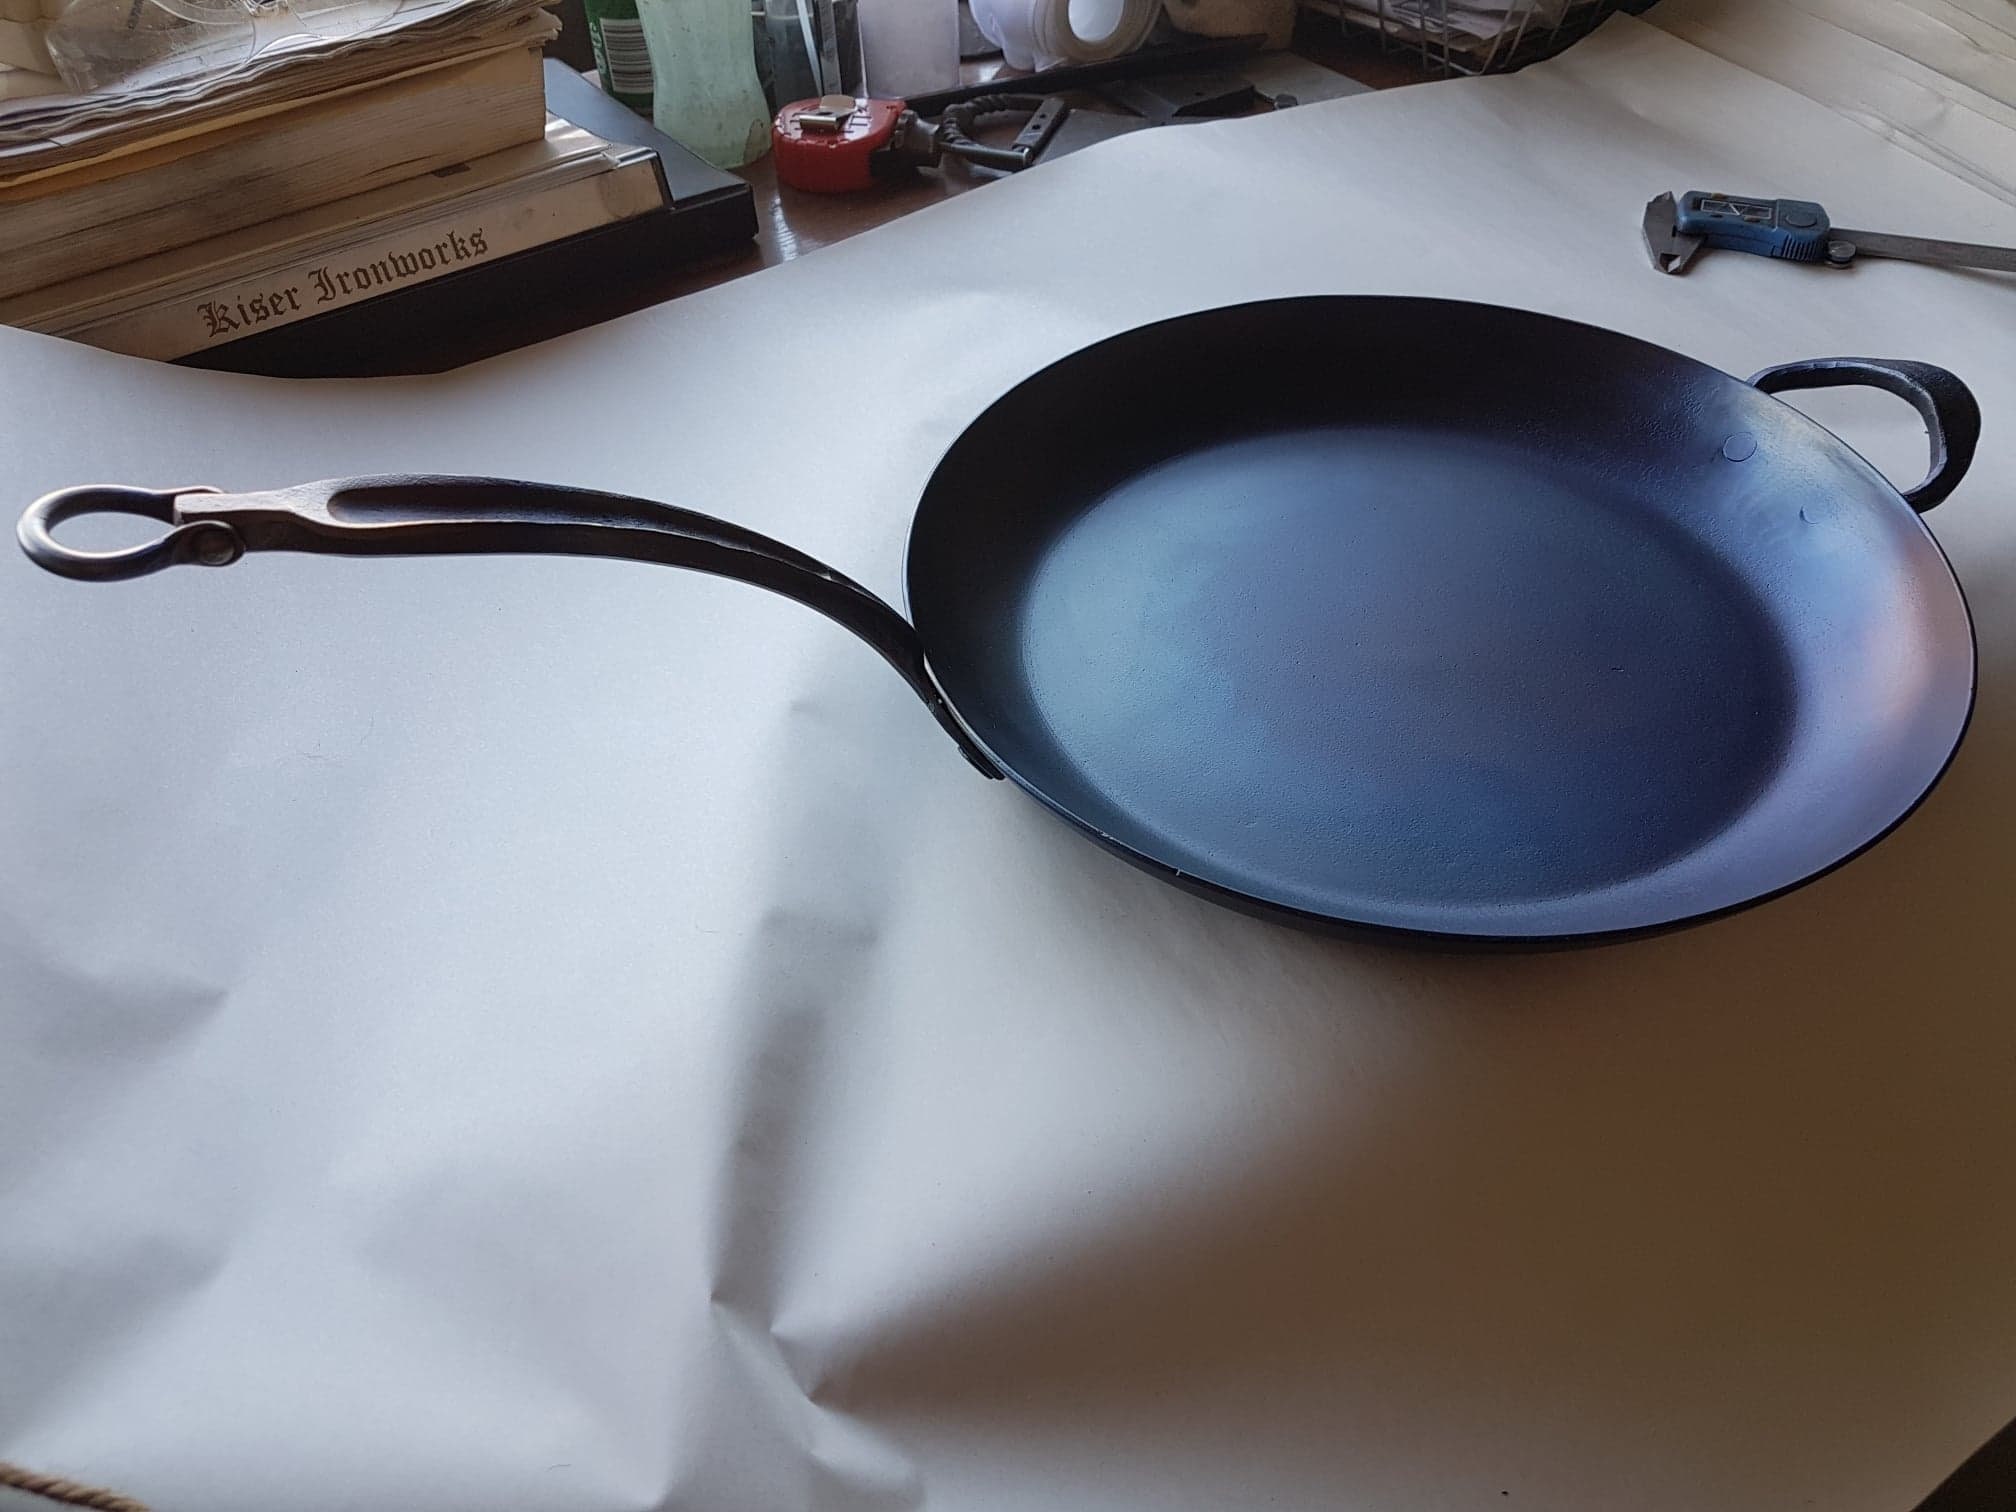 Hand Forged Carbon Steel 10 Inch Shallow Fry Pan, Cookware 